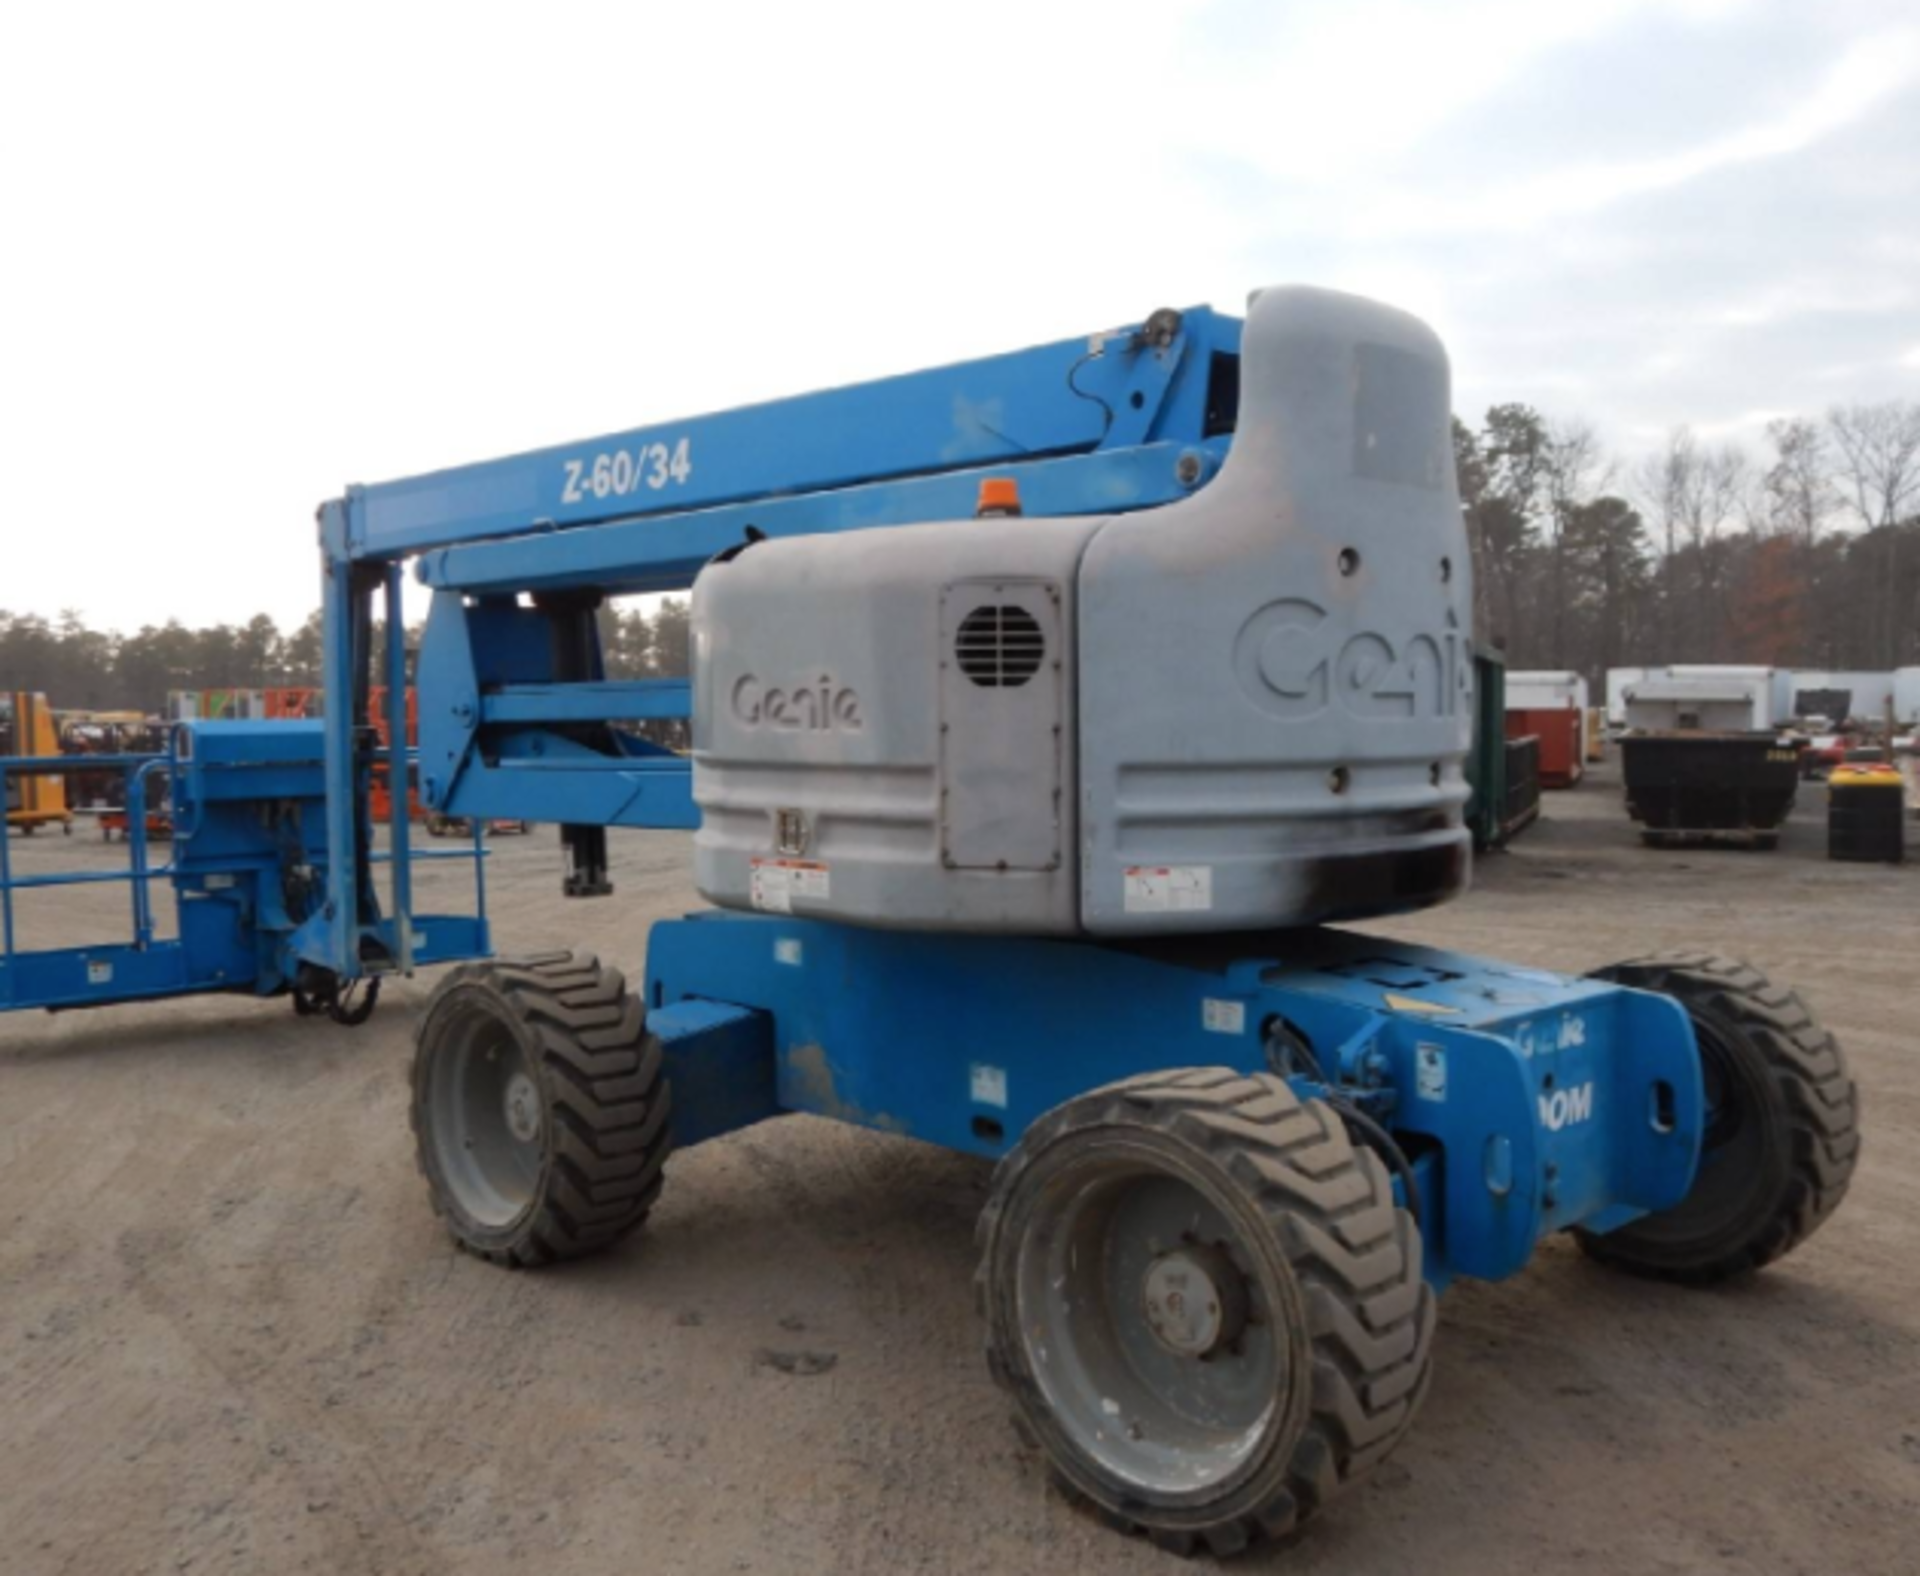 2012 Genie Z60/34 60ft Articulating Boom Lift - Image 2 of 5